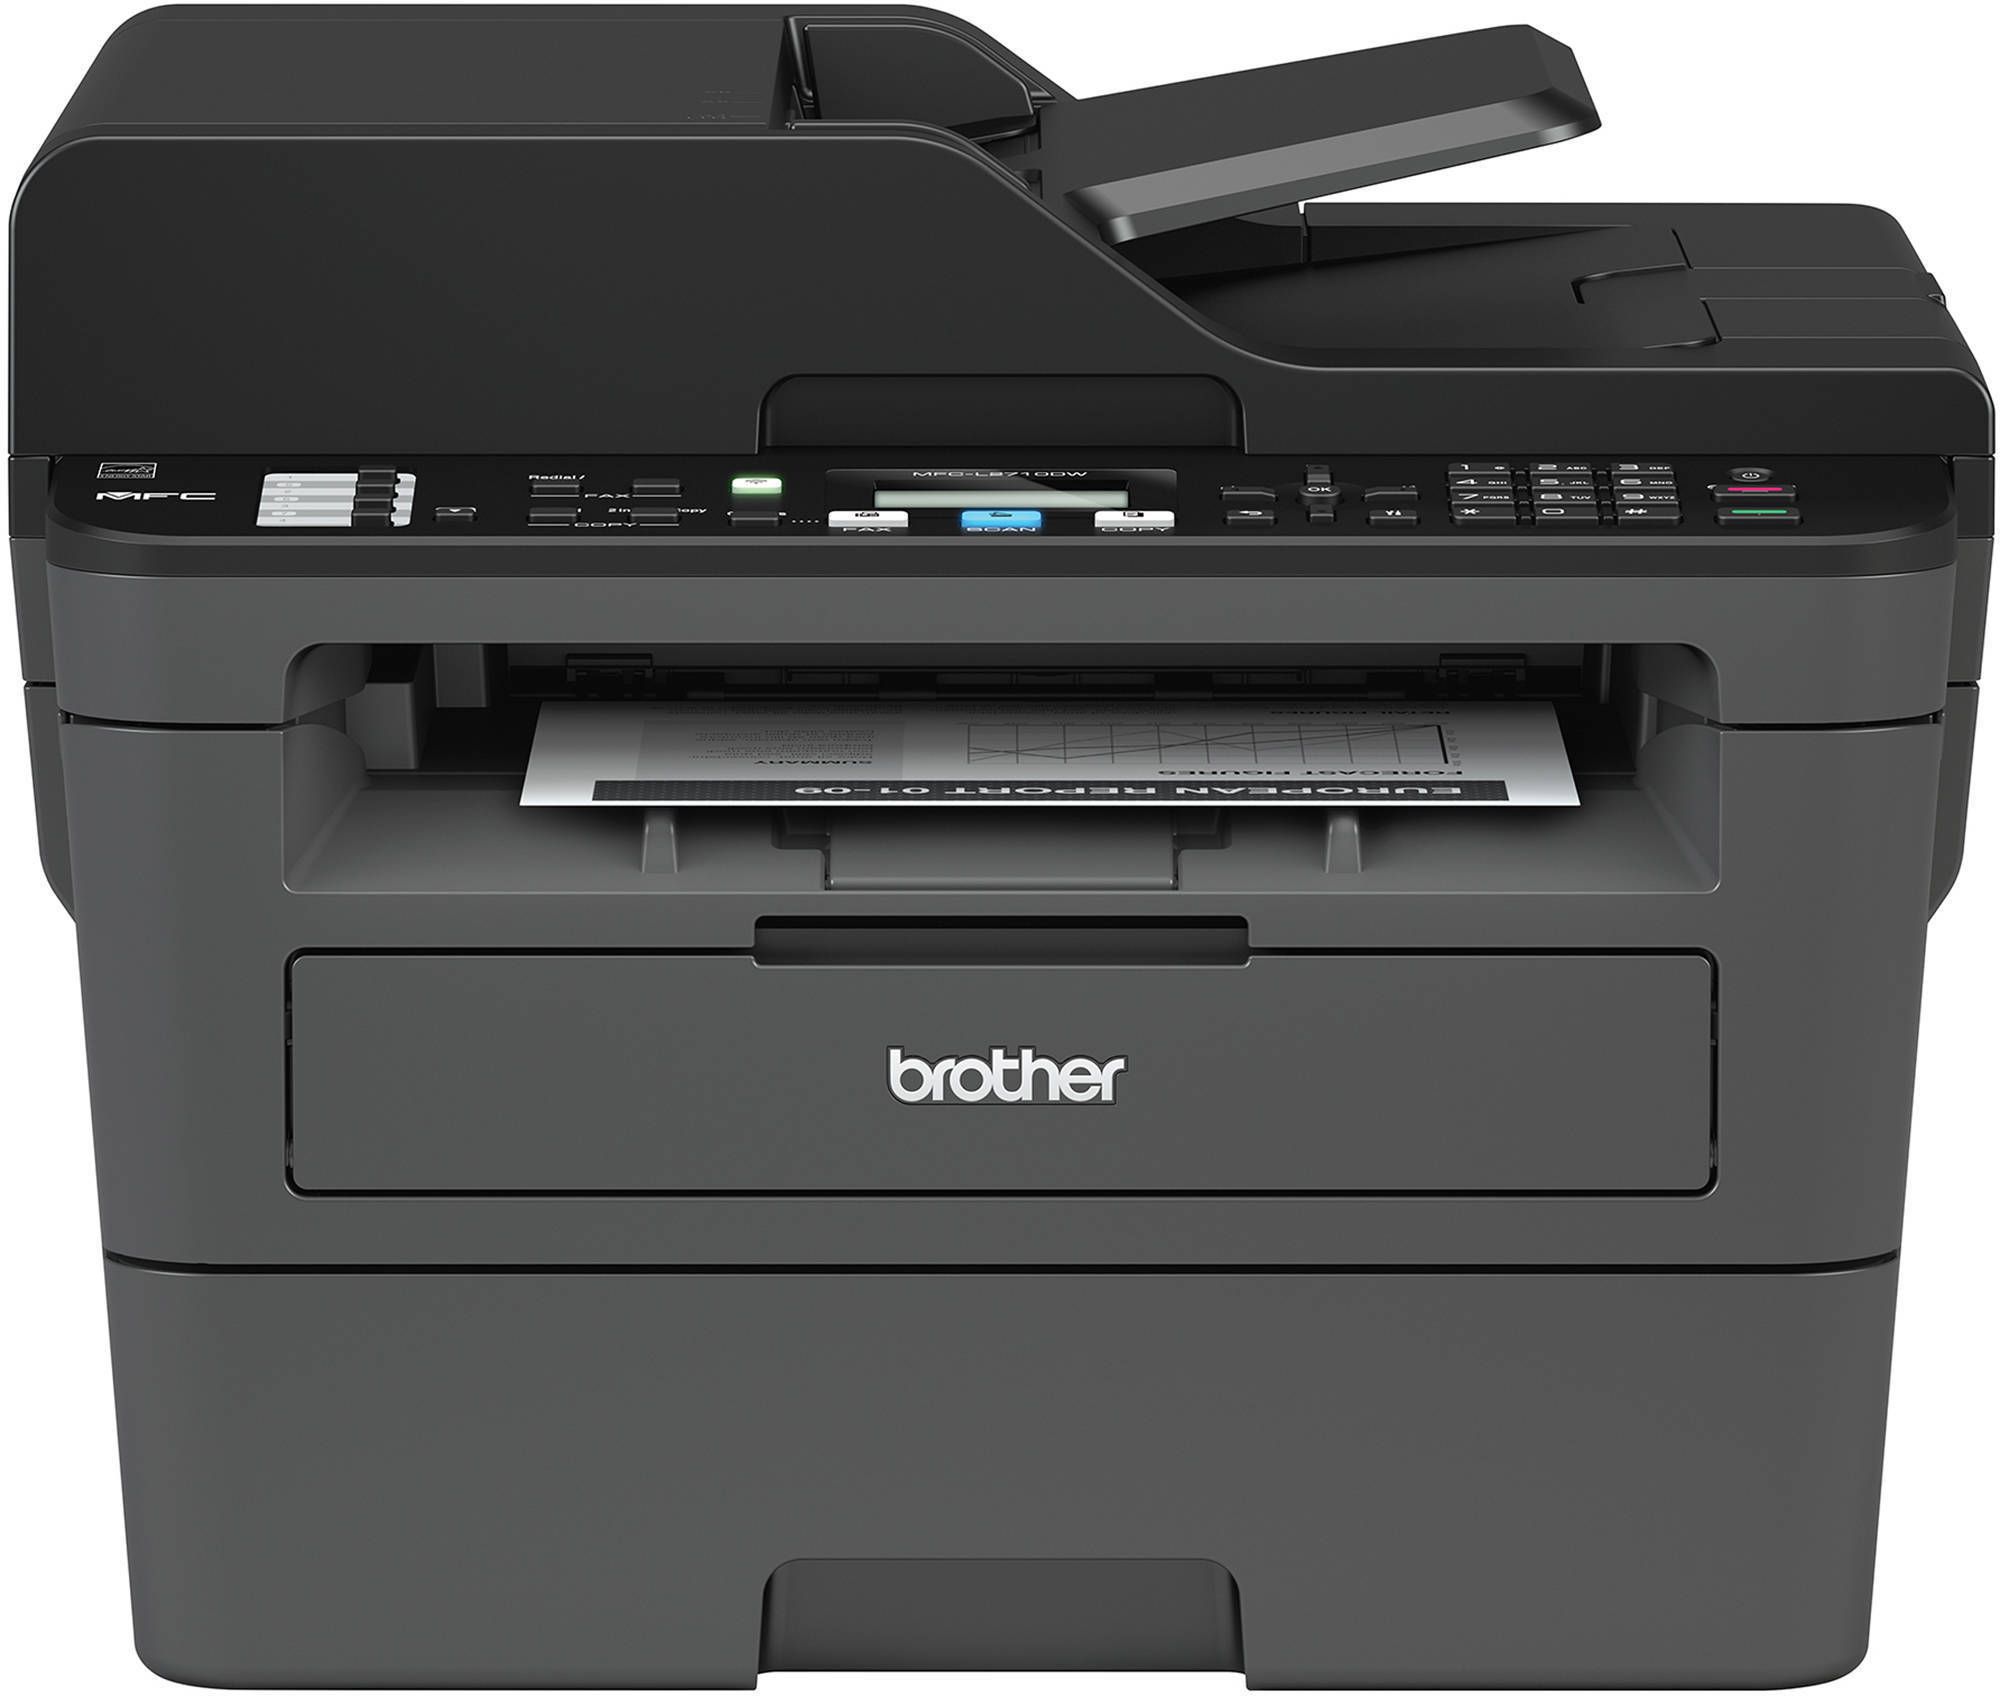 BROTHER MFCL2710DW A4 MFP mono laser